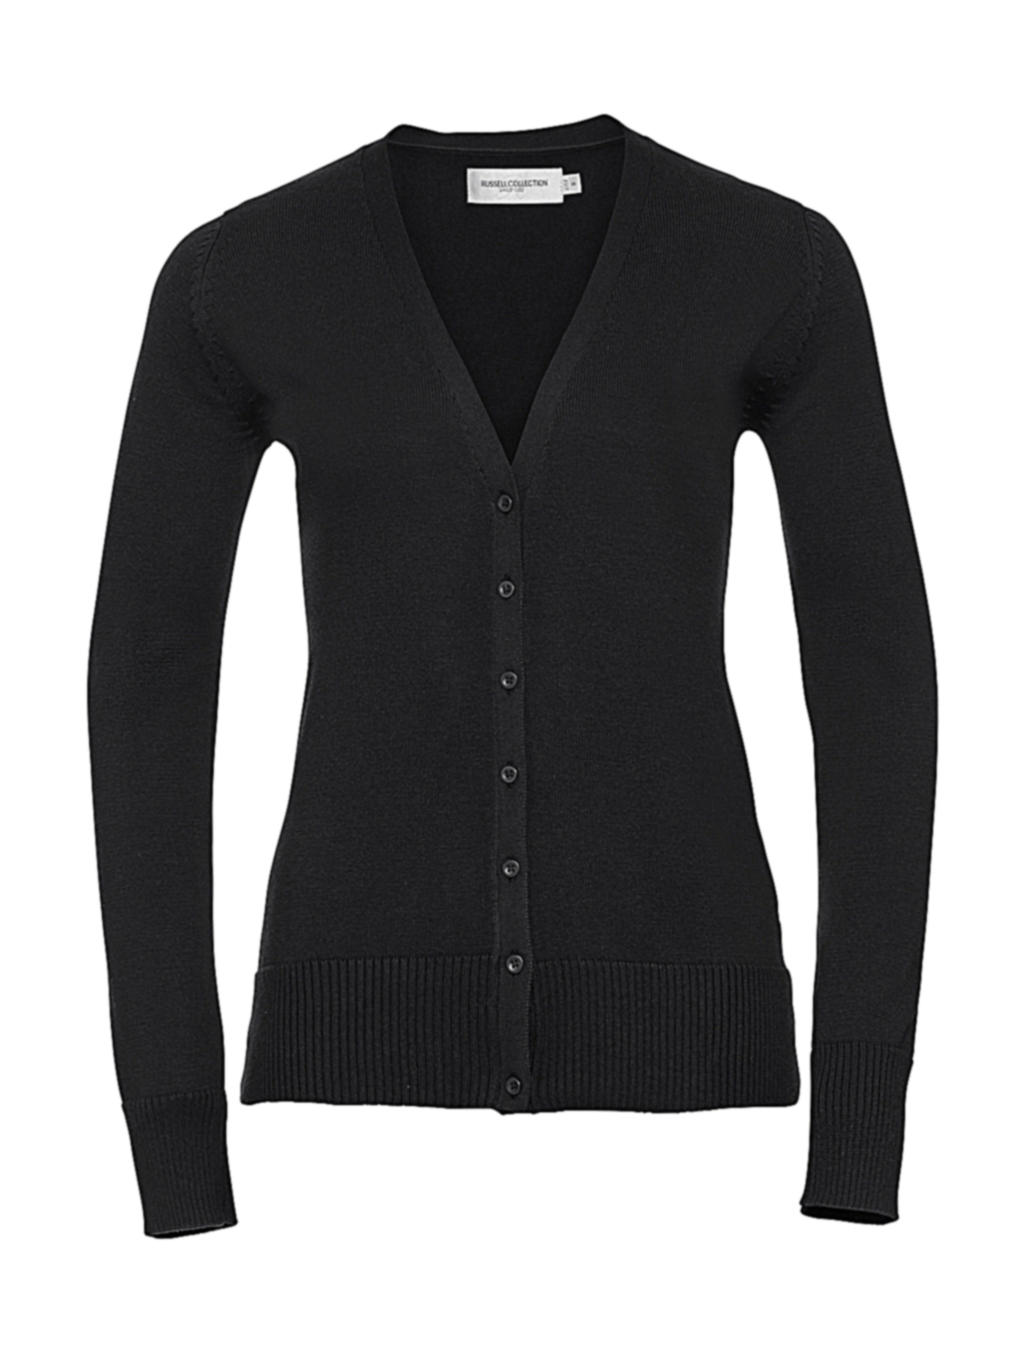  Ladies V-Neck Knitted Cardigan in Farbe Black